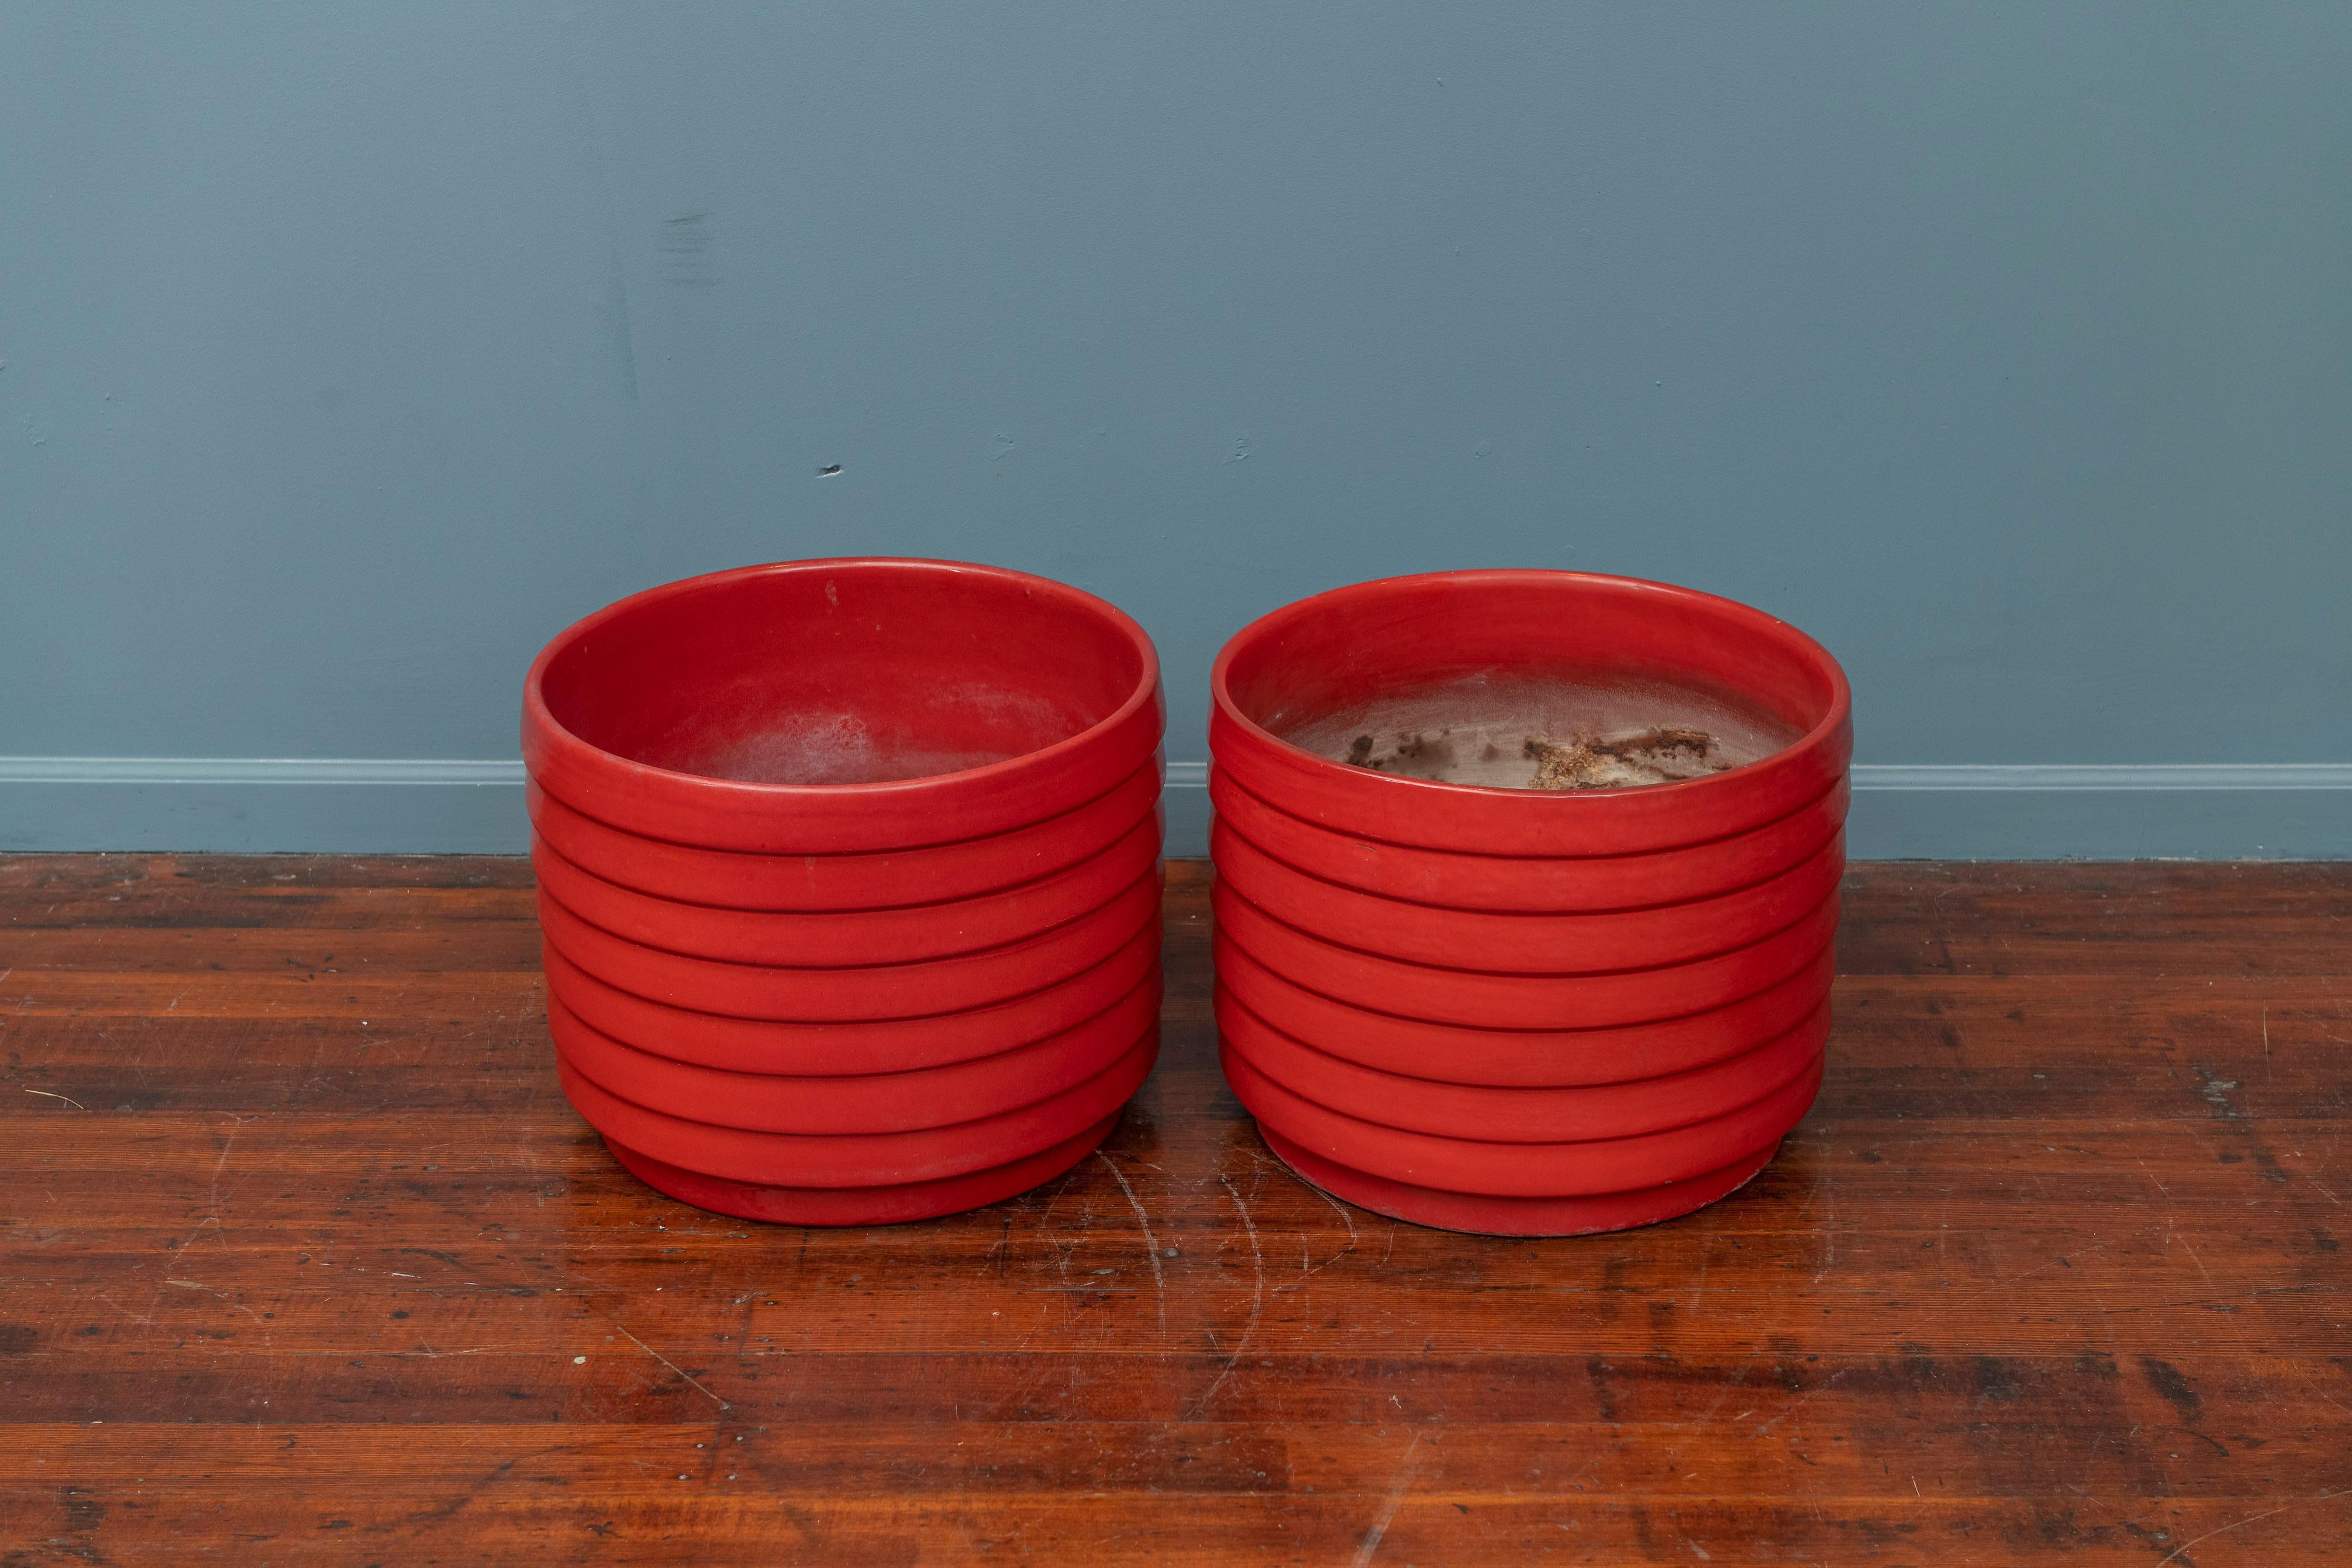 US pottery of paramount ring or ribbed pair of ceramic planters, actual color is more burnt orange than red. Large and impressive, great for the entry way or exterior garden pots.